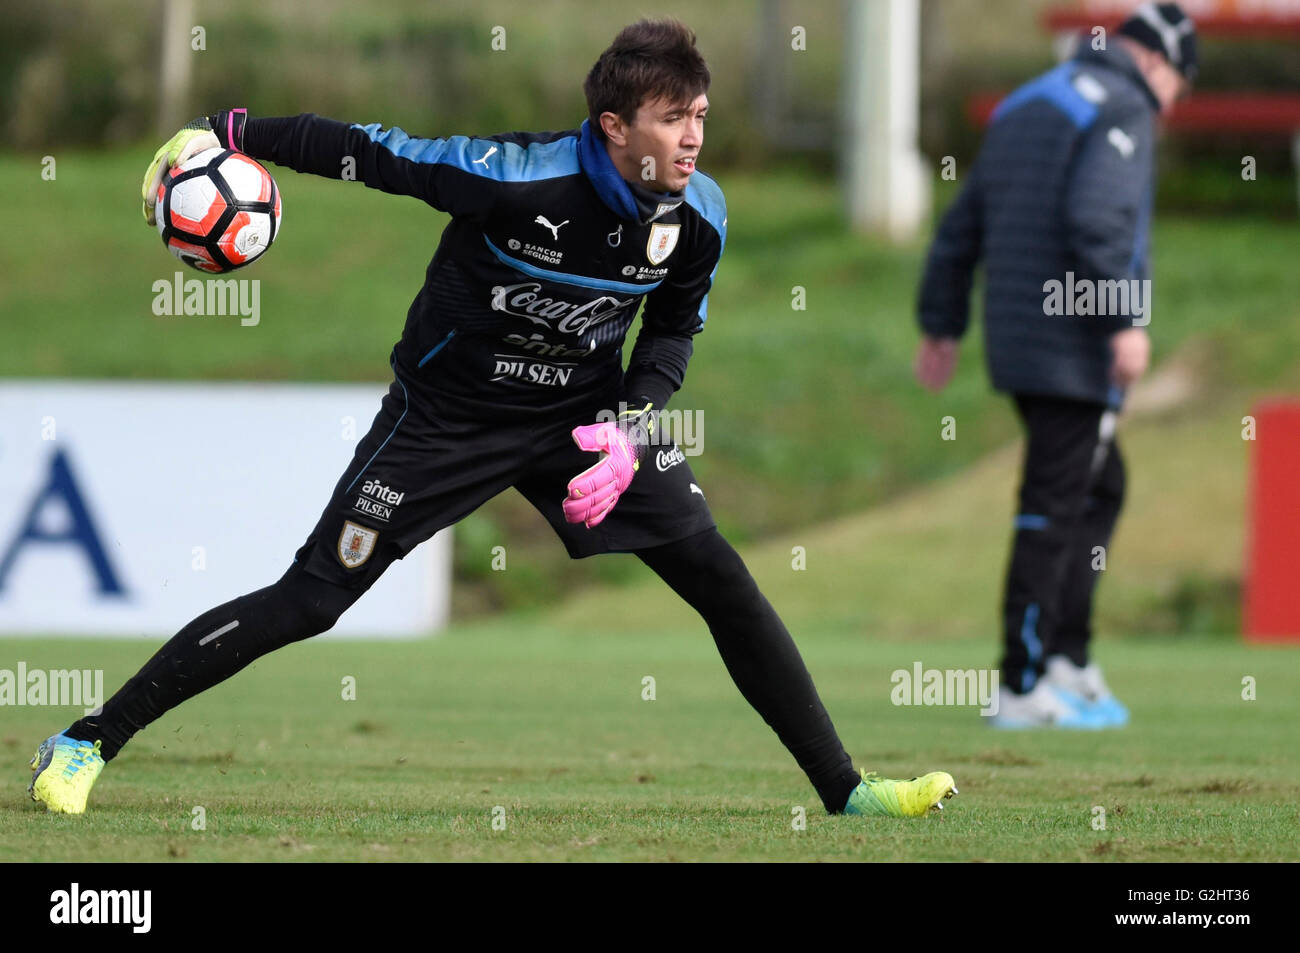 Canelones, Uruguay. 31st May, 2016. Fernando Muslera, goalkeeper of Uruguay's national soccer team, takes part in a training session in Canelones, Uruguay, May 31, 2016. Uruguay will face Mexico in their first match of Copa America Centenario, to be held in June in the United States. © Nicolas Celaya/Xinhua/Alamy Live News Stock Photo